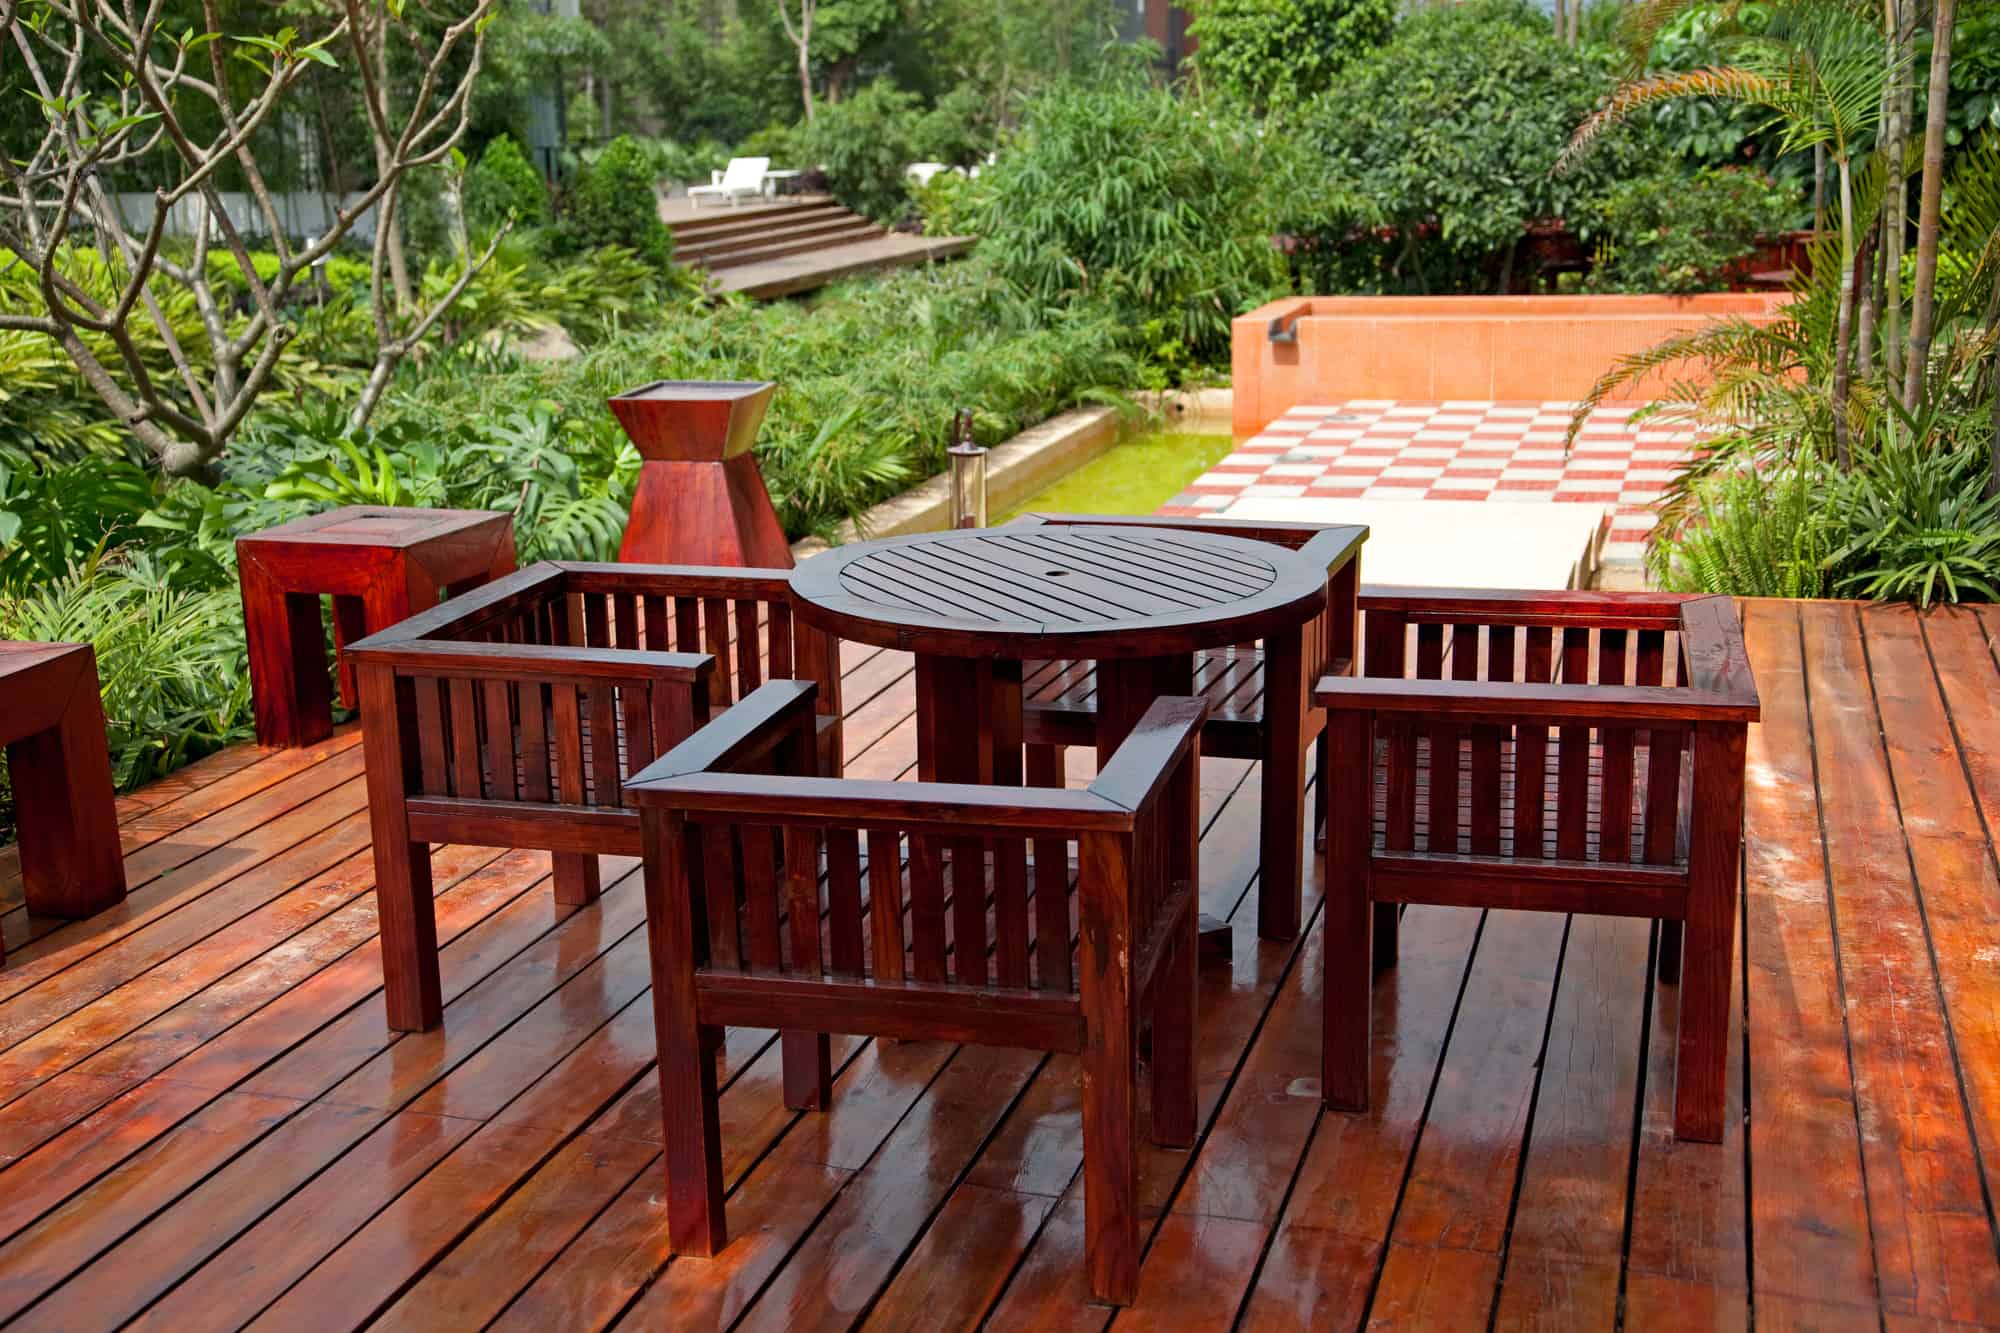 Patio Furniture Materials Ranked By, What Is The Best All Weather Material For Outdoor Furniture